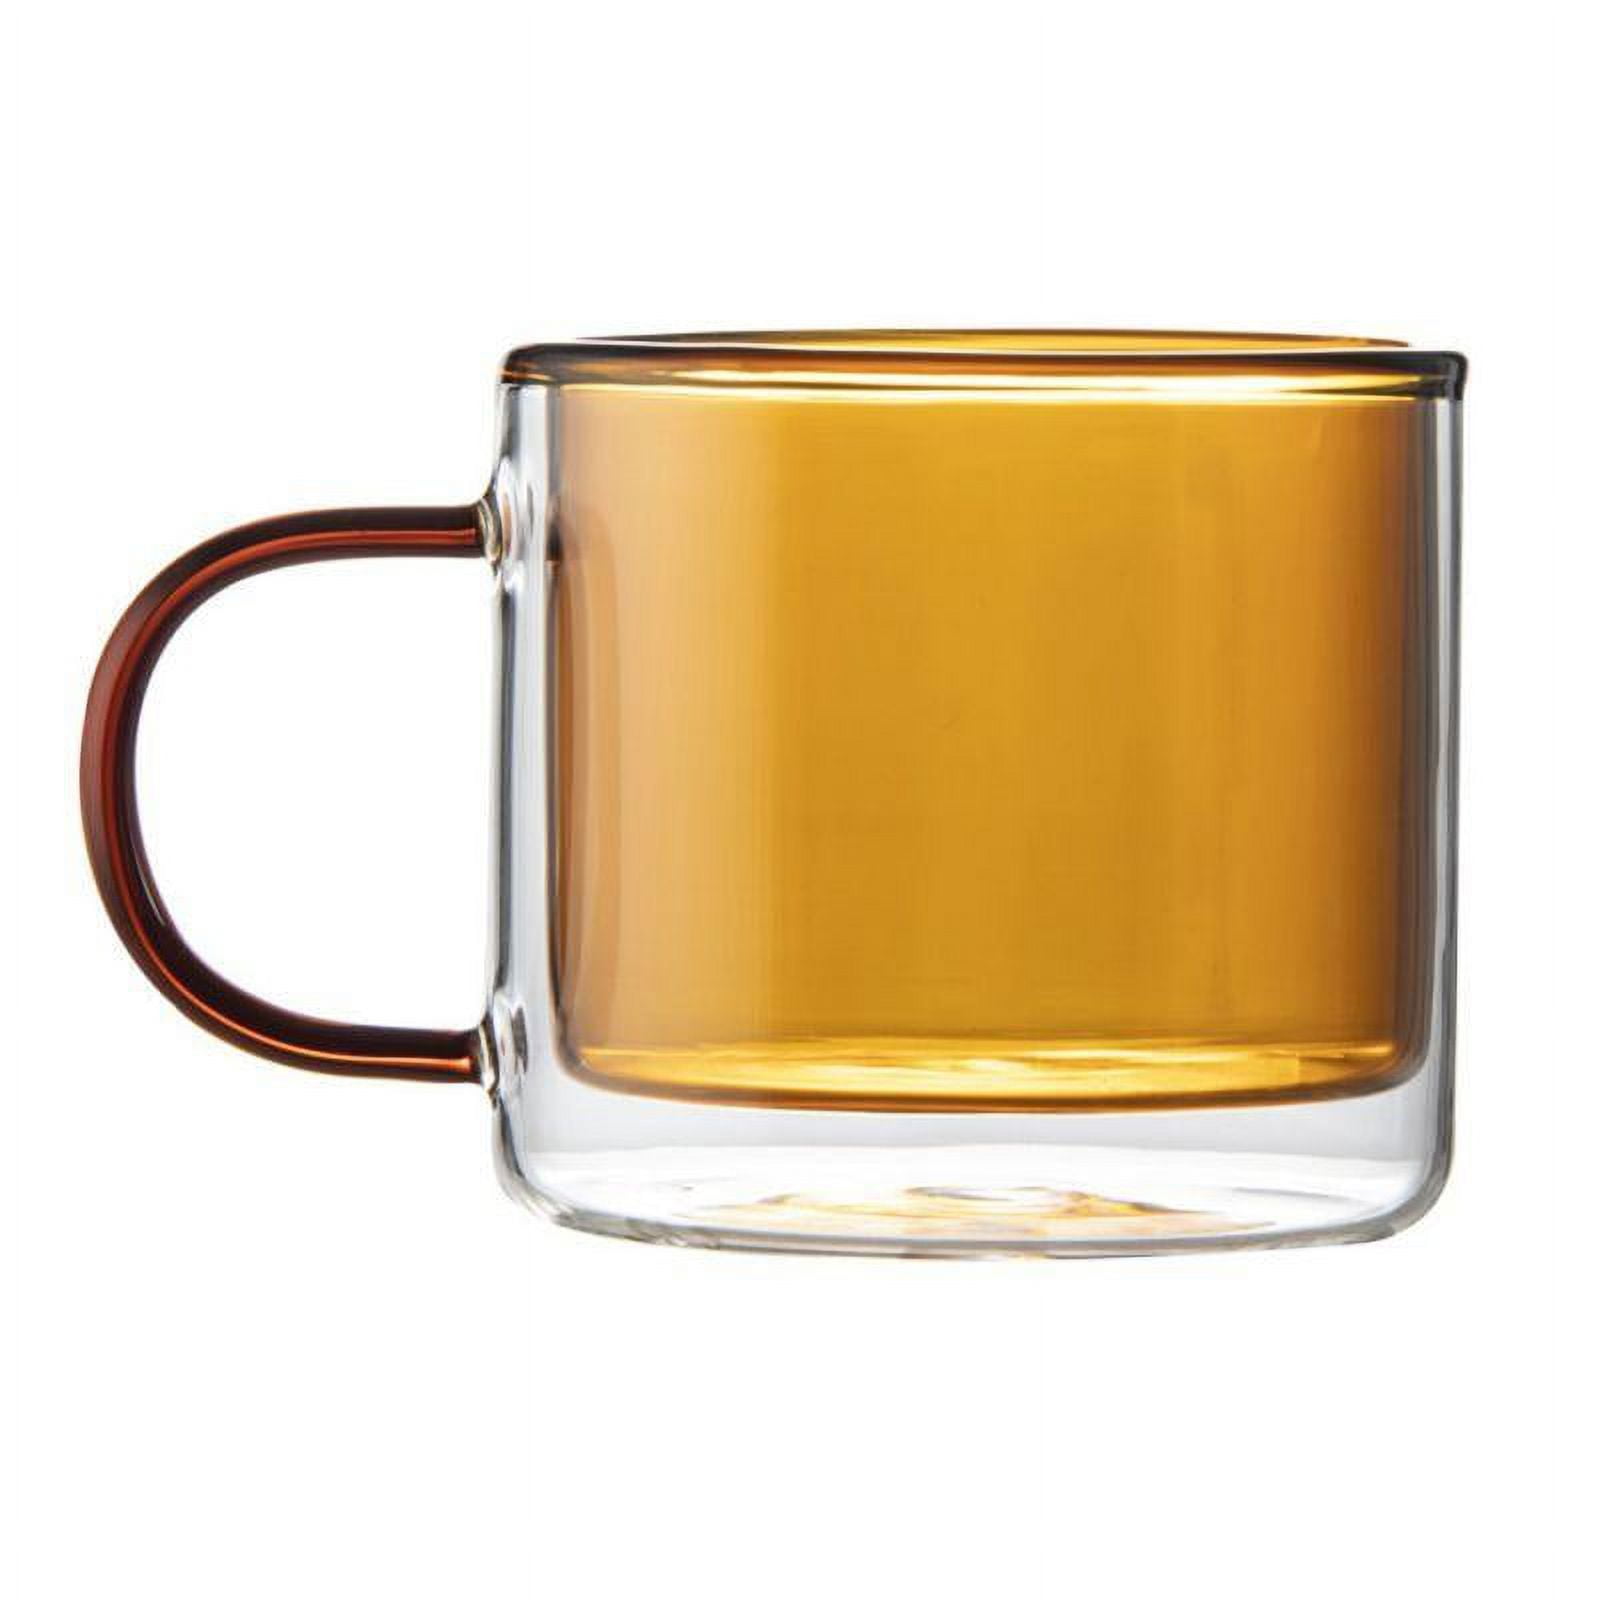 Punpun Coffee Cups Clear Coffee Mugs, Espresso Cups,Double Wall Glass Coffee Mugs with Big Handle, Clear Mugs Each 380ml, Perfect Glass Mugs for Hot